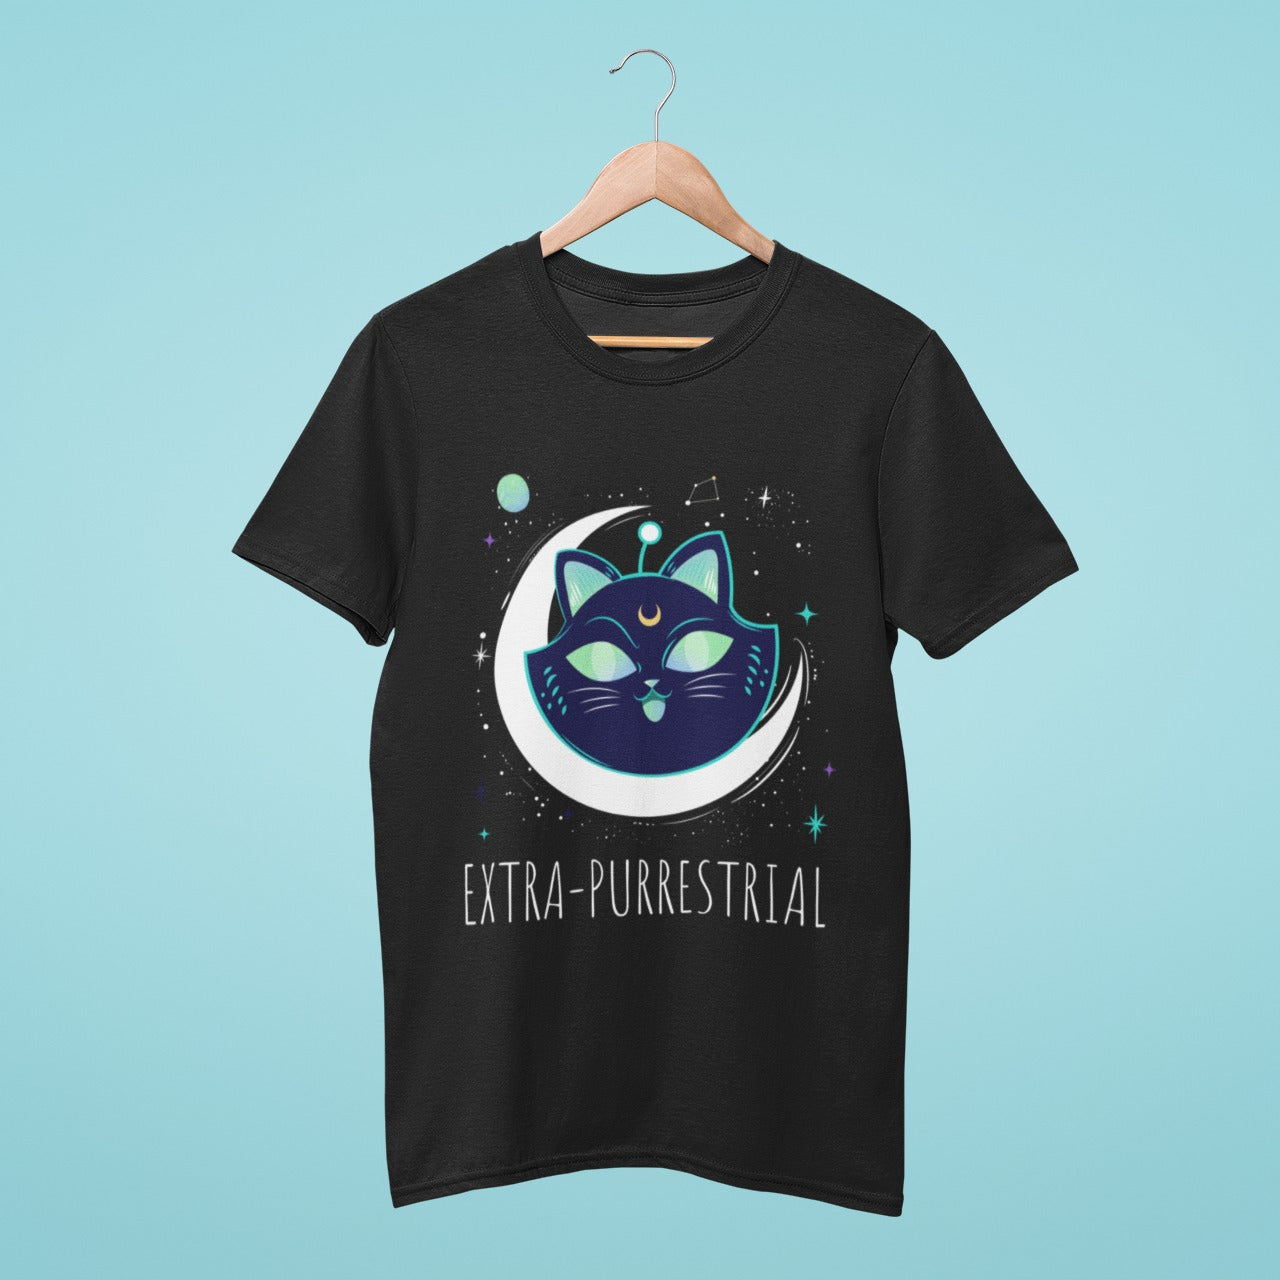 Elevate your wardrobe with our black t-shirt featuring a one-of-a-kind design of an alien-like cat's face on a crescent moon, with the title "Extrapurrestrial". Perfect for cat enthusiasts and those who love unique fashion. Made from high-quality materials, this comfortable and durable t-shirt is a must-have. Order now and show off your love for feline creatures and the extraterrestrial!